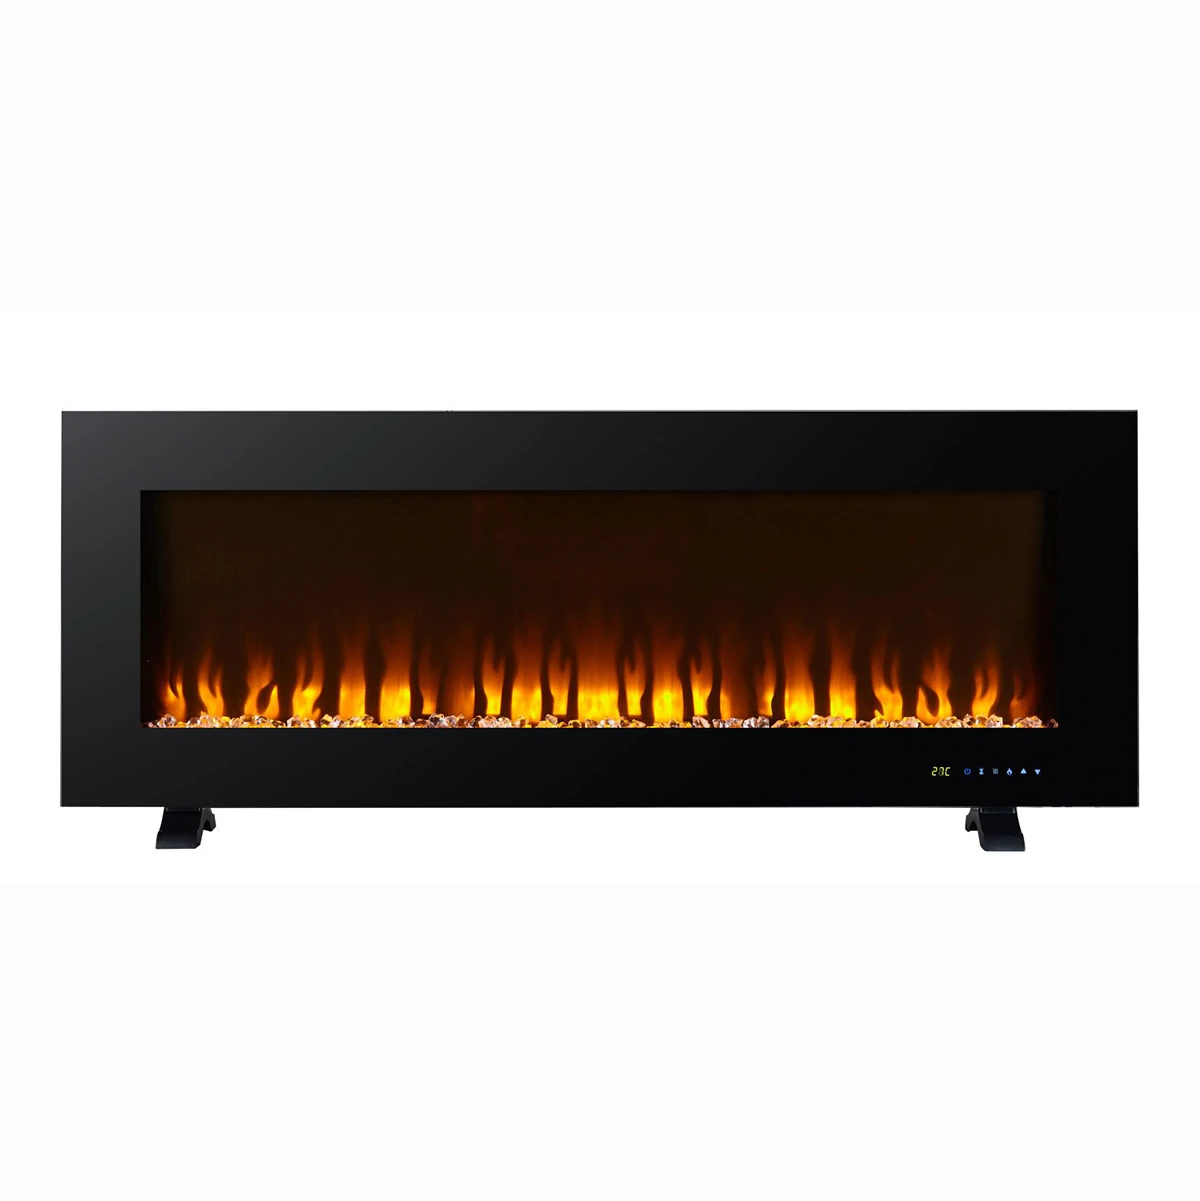 48 Inches Electric Wall Mounted & Freestanding Electric Fireplace Heater With Color Flame Effect